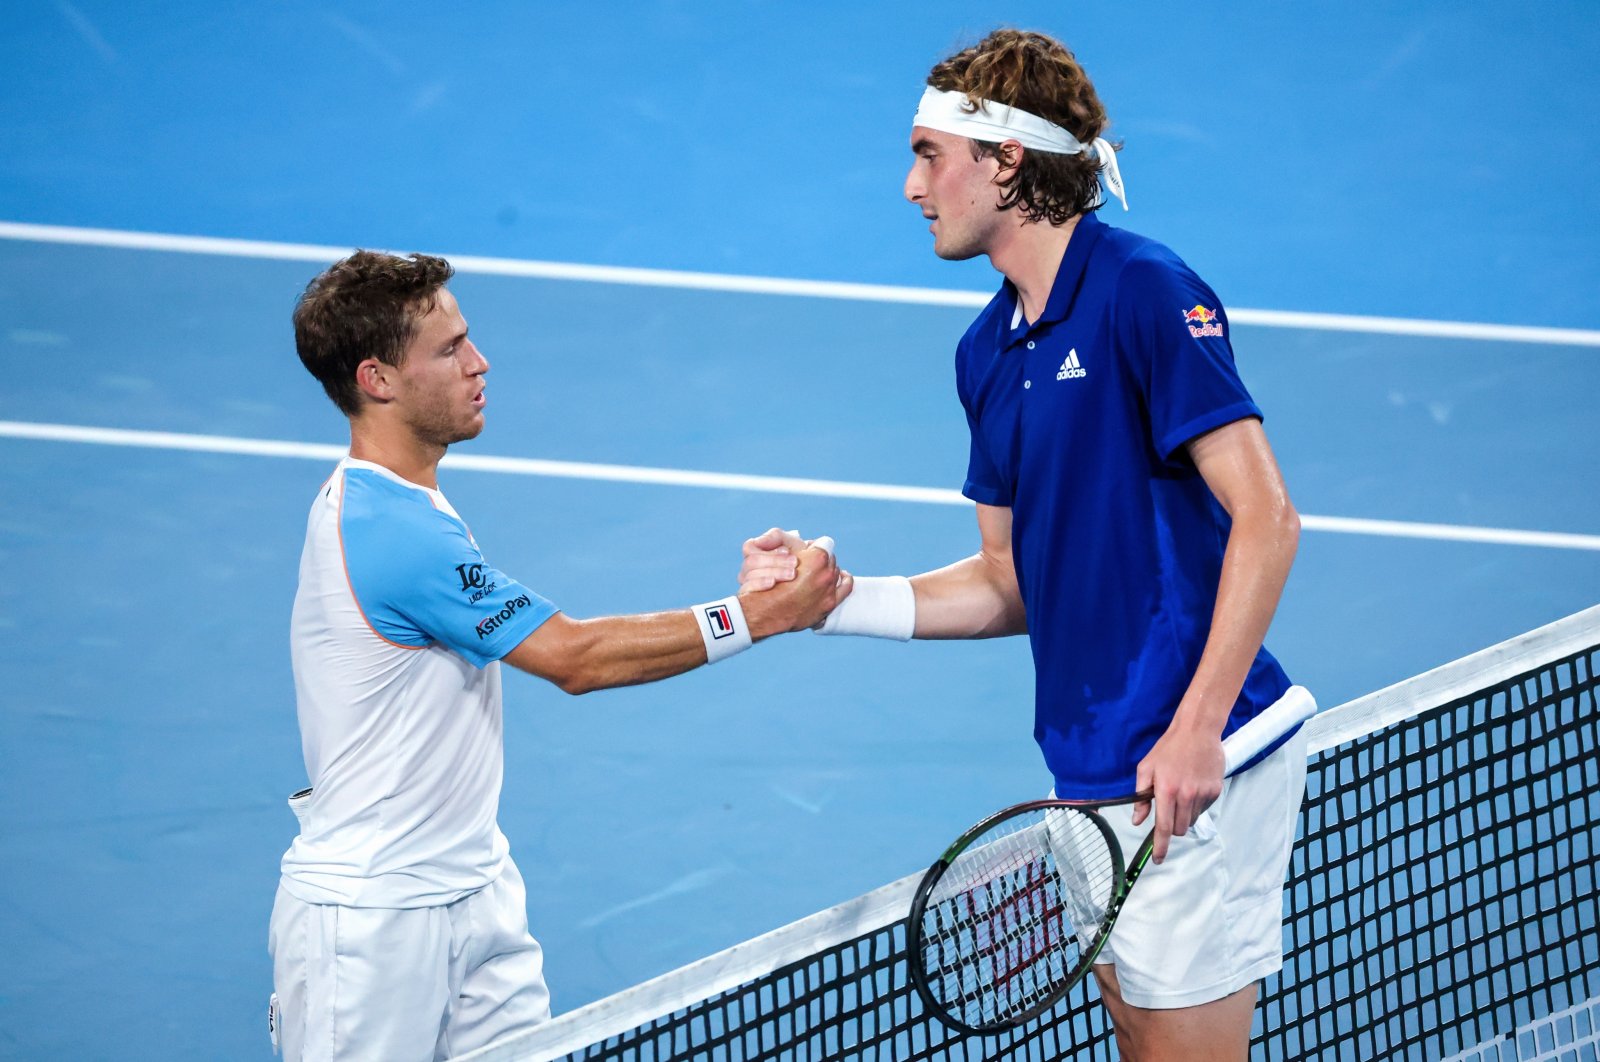 Argentina&#039;s Diego Schwartzman (L) shakes hands with Greece&#039;s Stefanos Tsitsipas after their match on Day 3 of the ATP Cup, Sydney, Australia, Jan. 3, 2022. (EPA Photo)